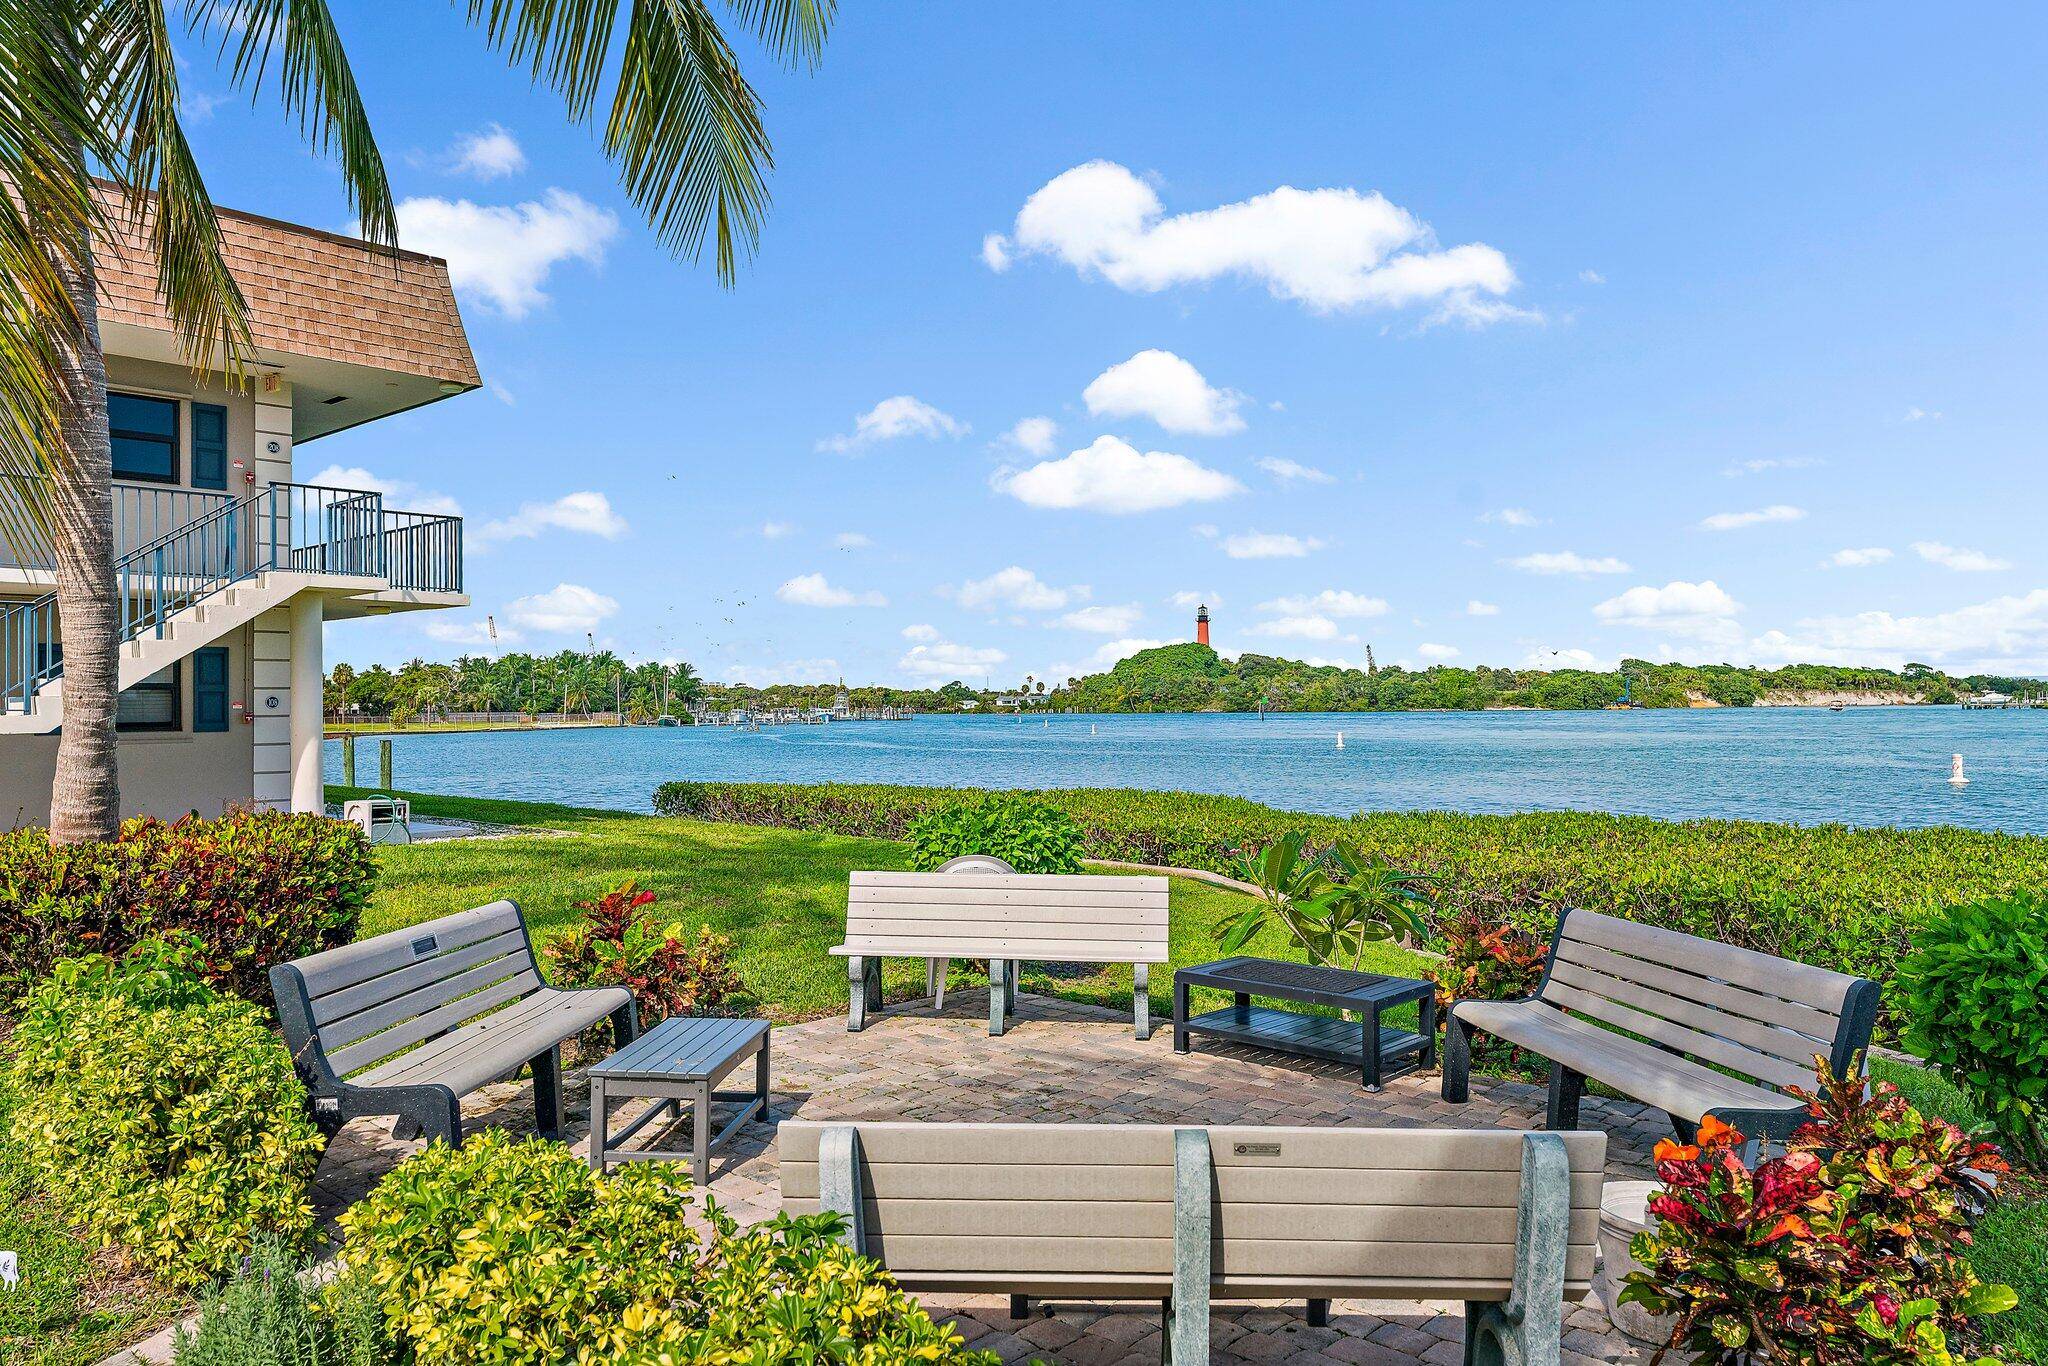 Great view to Jupiter Inlet blue water and ocean.